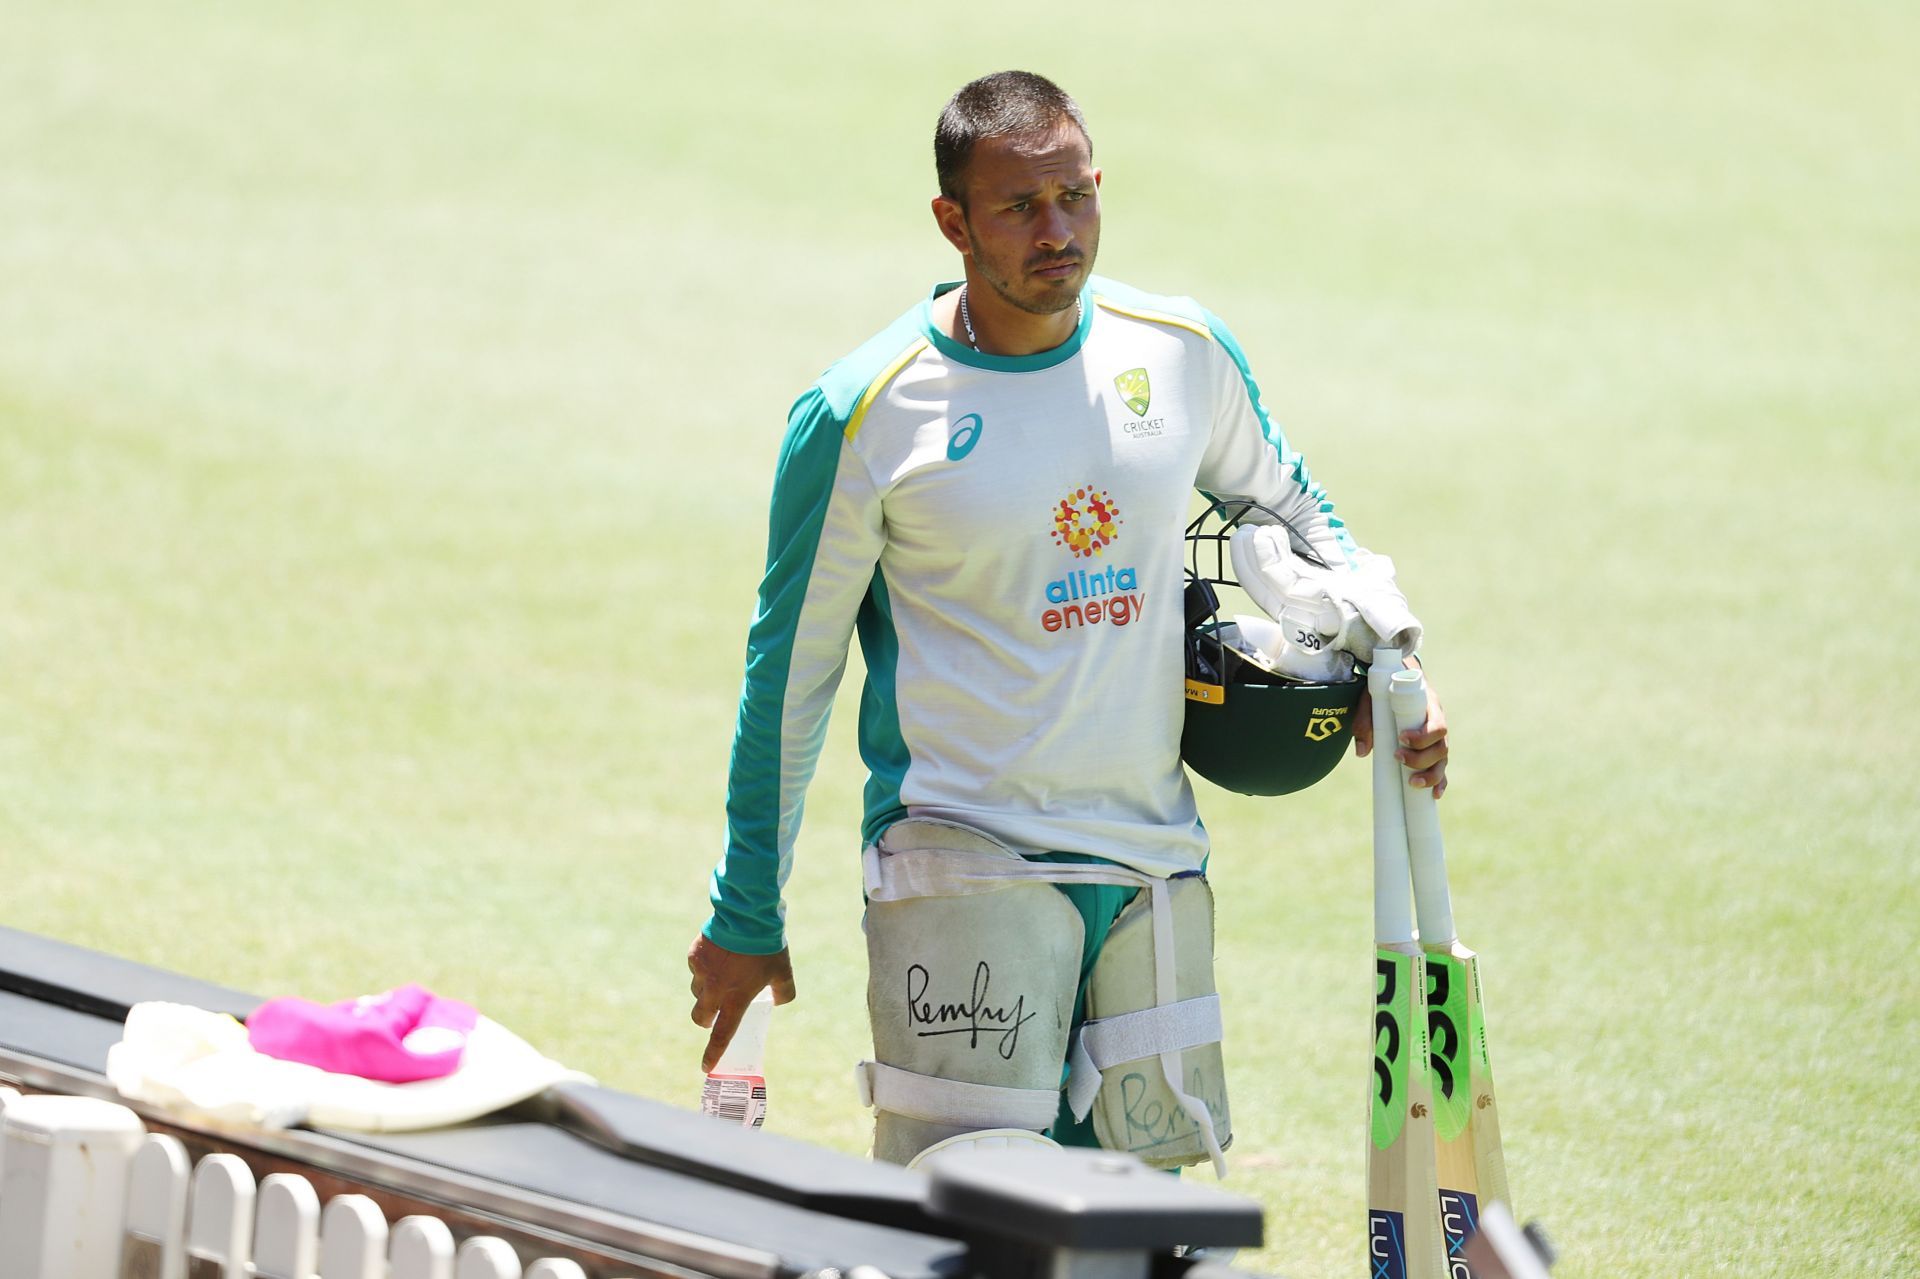 Usman Khawaja is set to play his first Test in over two years, having been named in the Australian XI for the fourth Ashes Test.